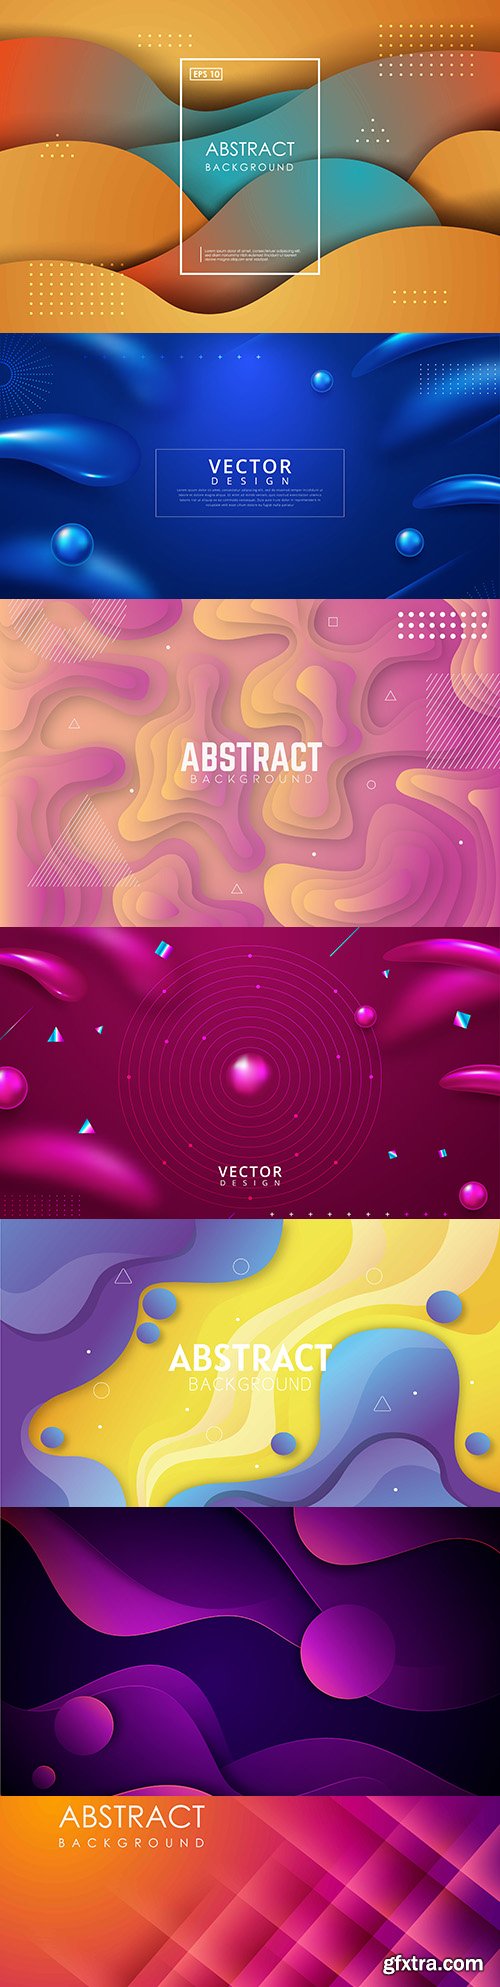 Geometric background shape gradient abstract composition
